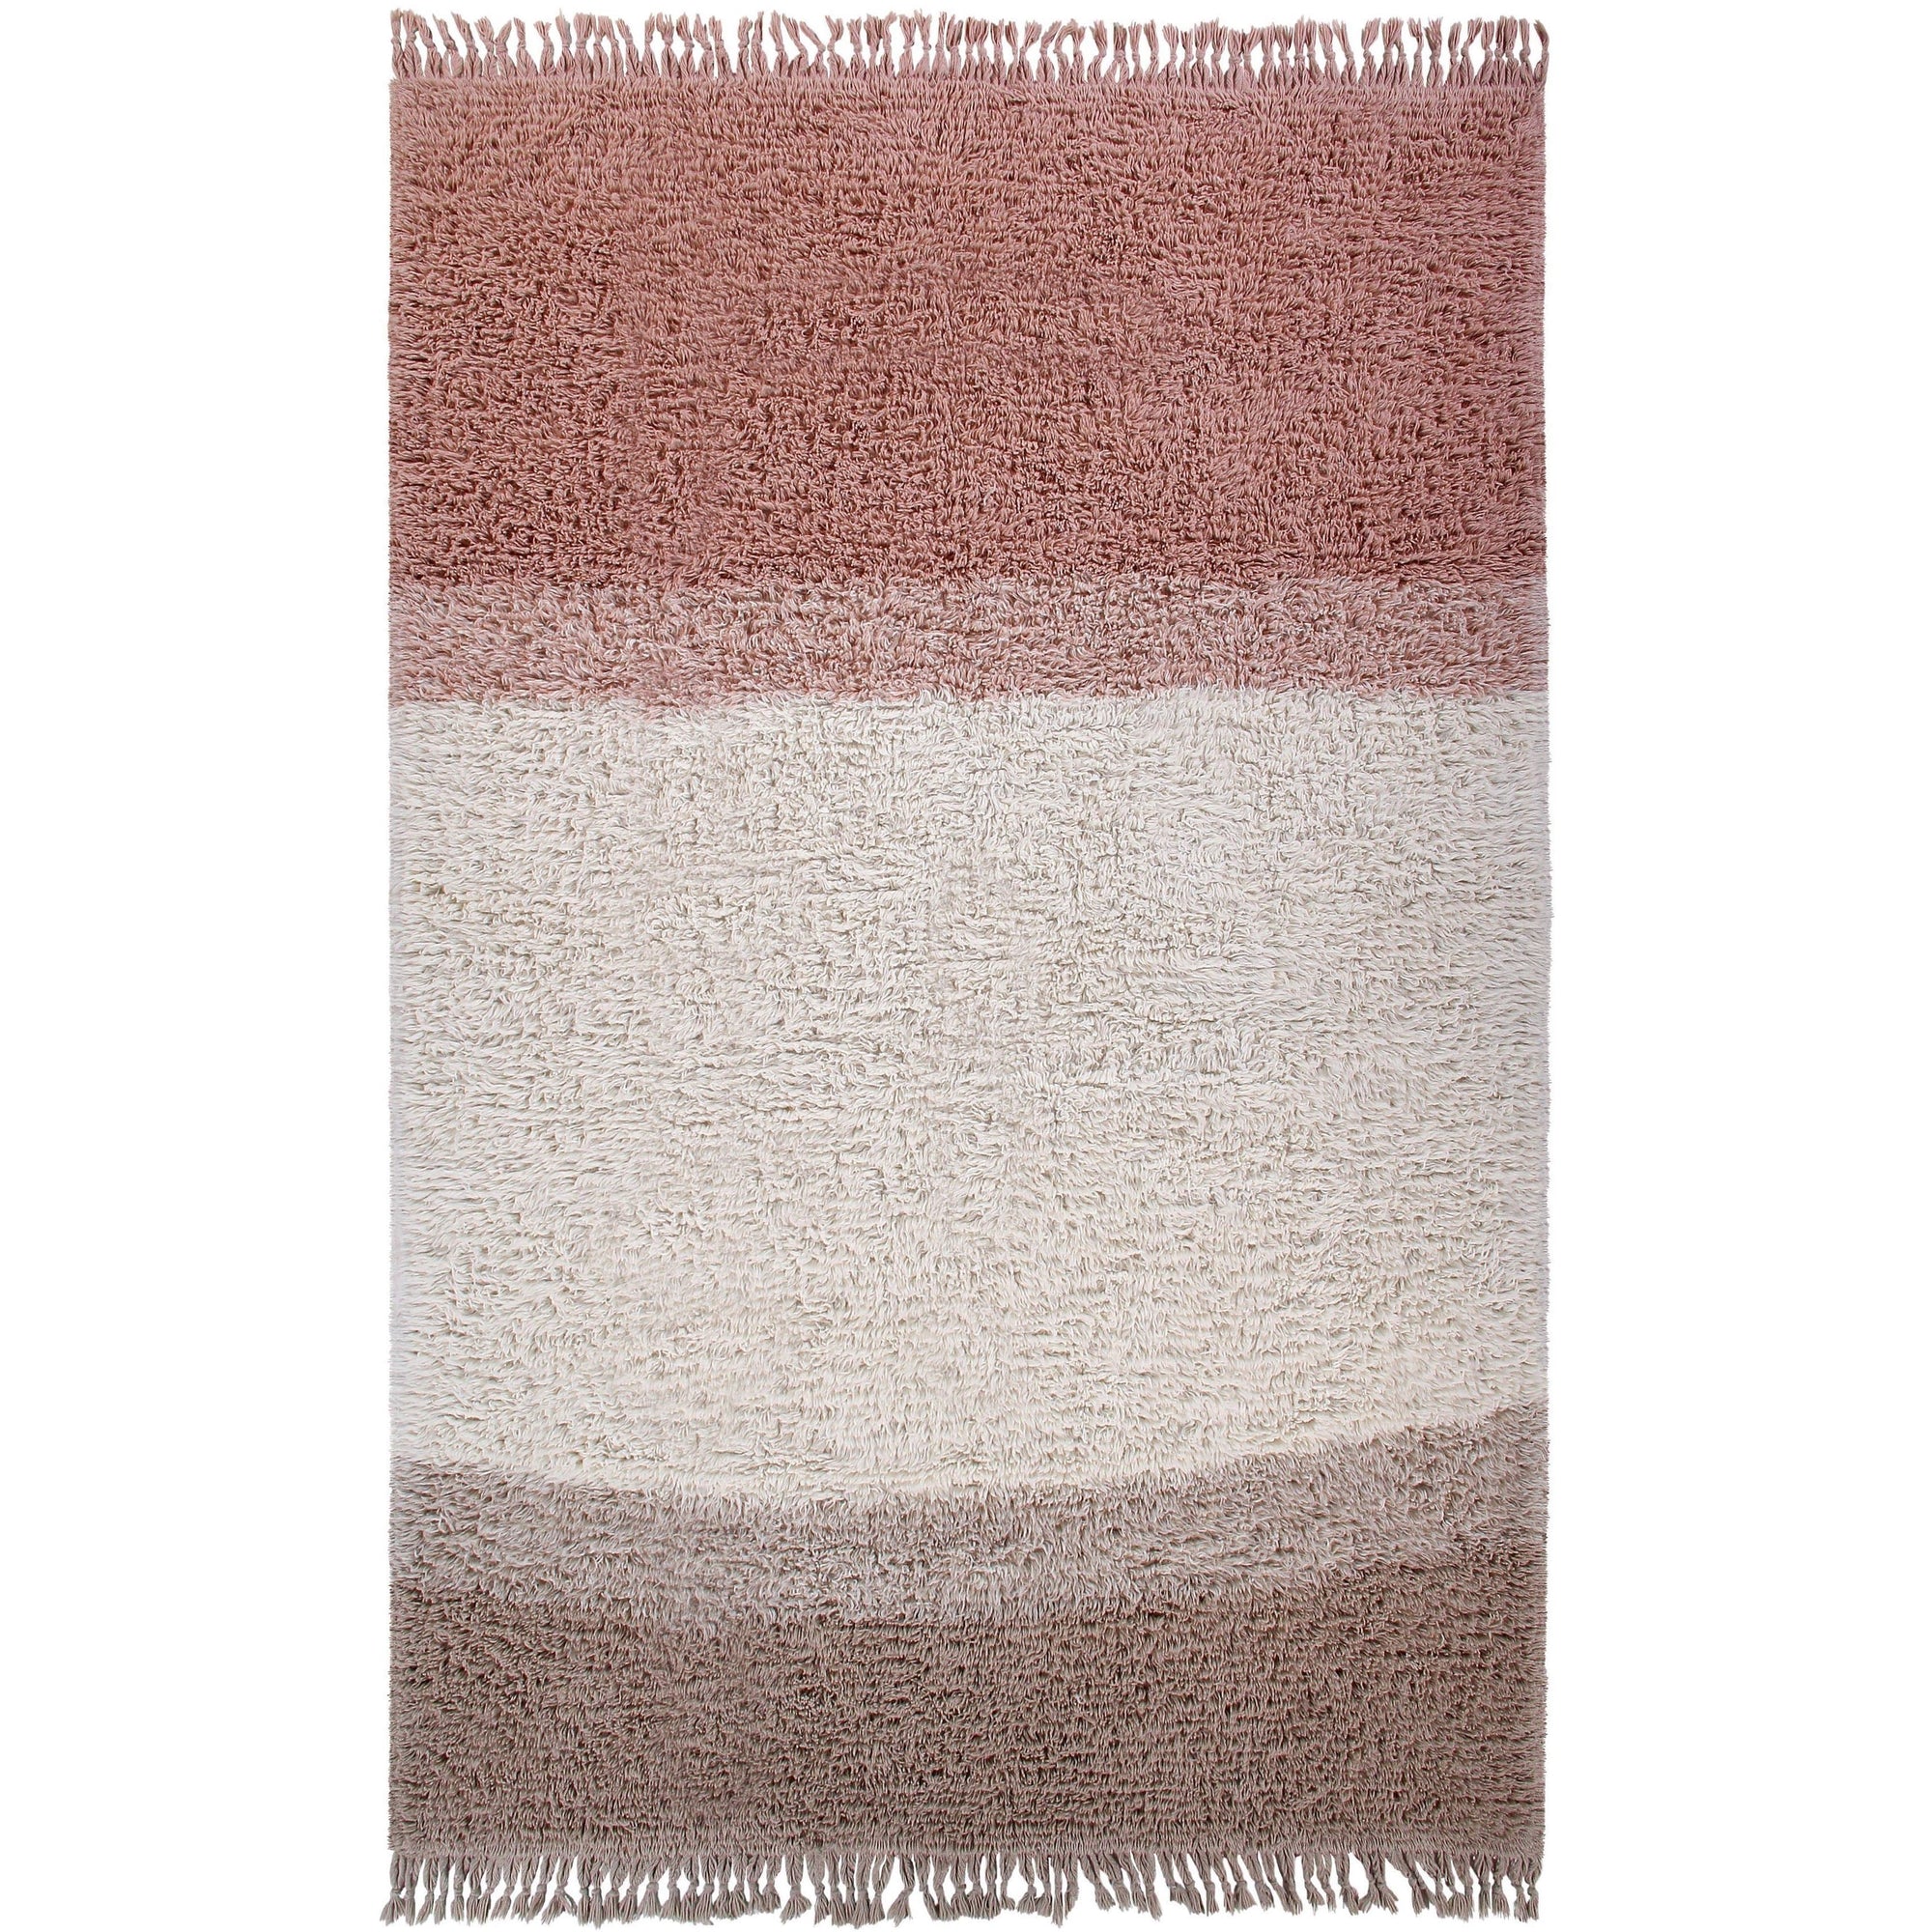 Lorena Canals Sounds of Summer Wool Washable Area Rug